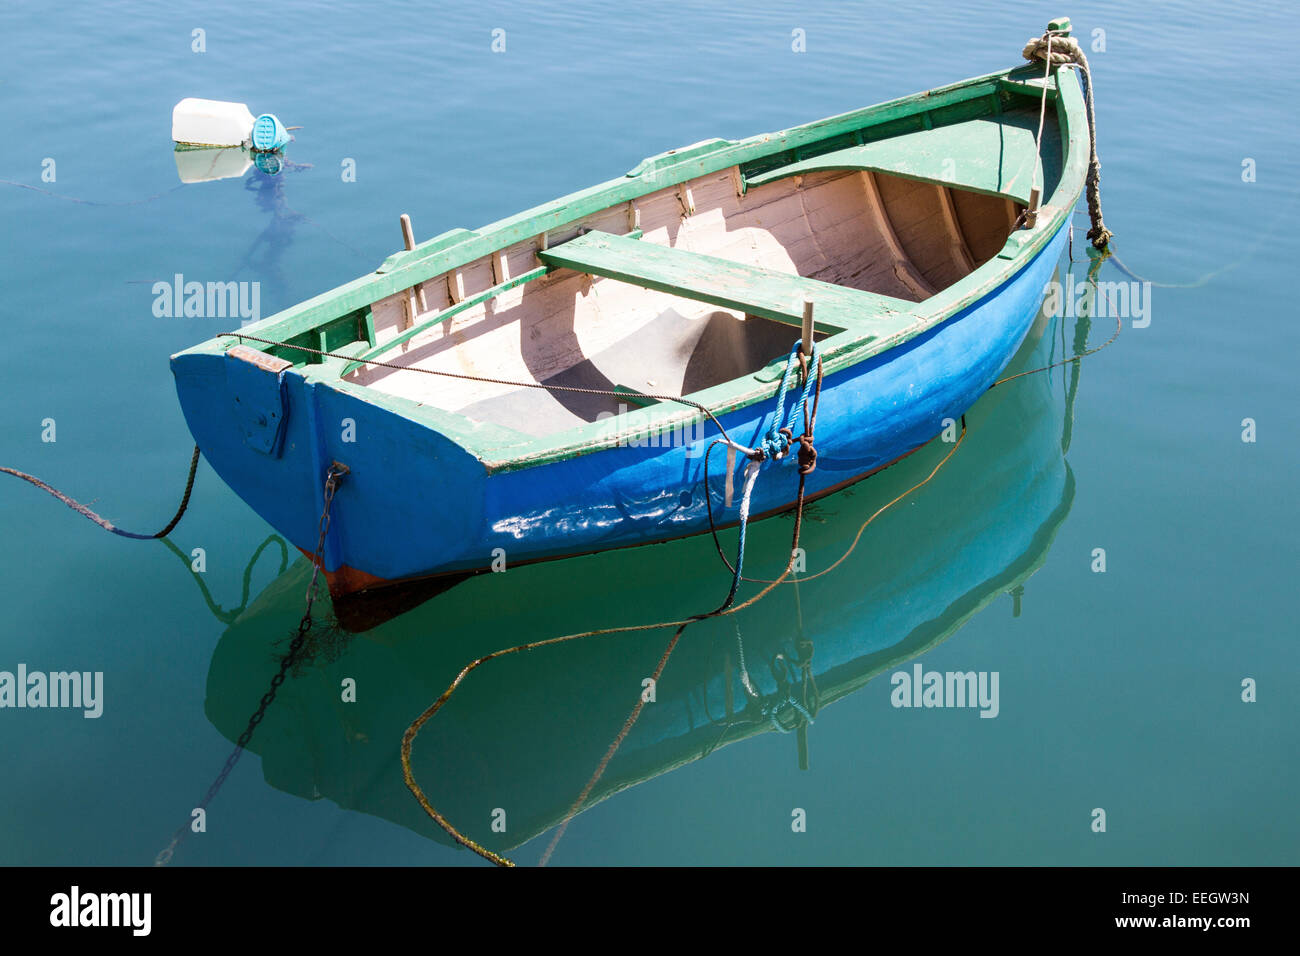 A rowing boat with reflection in the water of Spinola Bay which is within St Julians Bay Malta Stock Photo